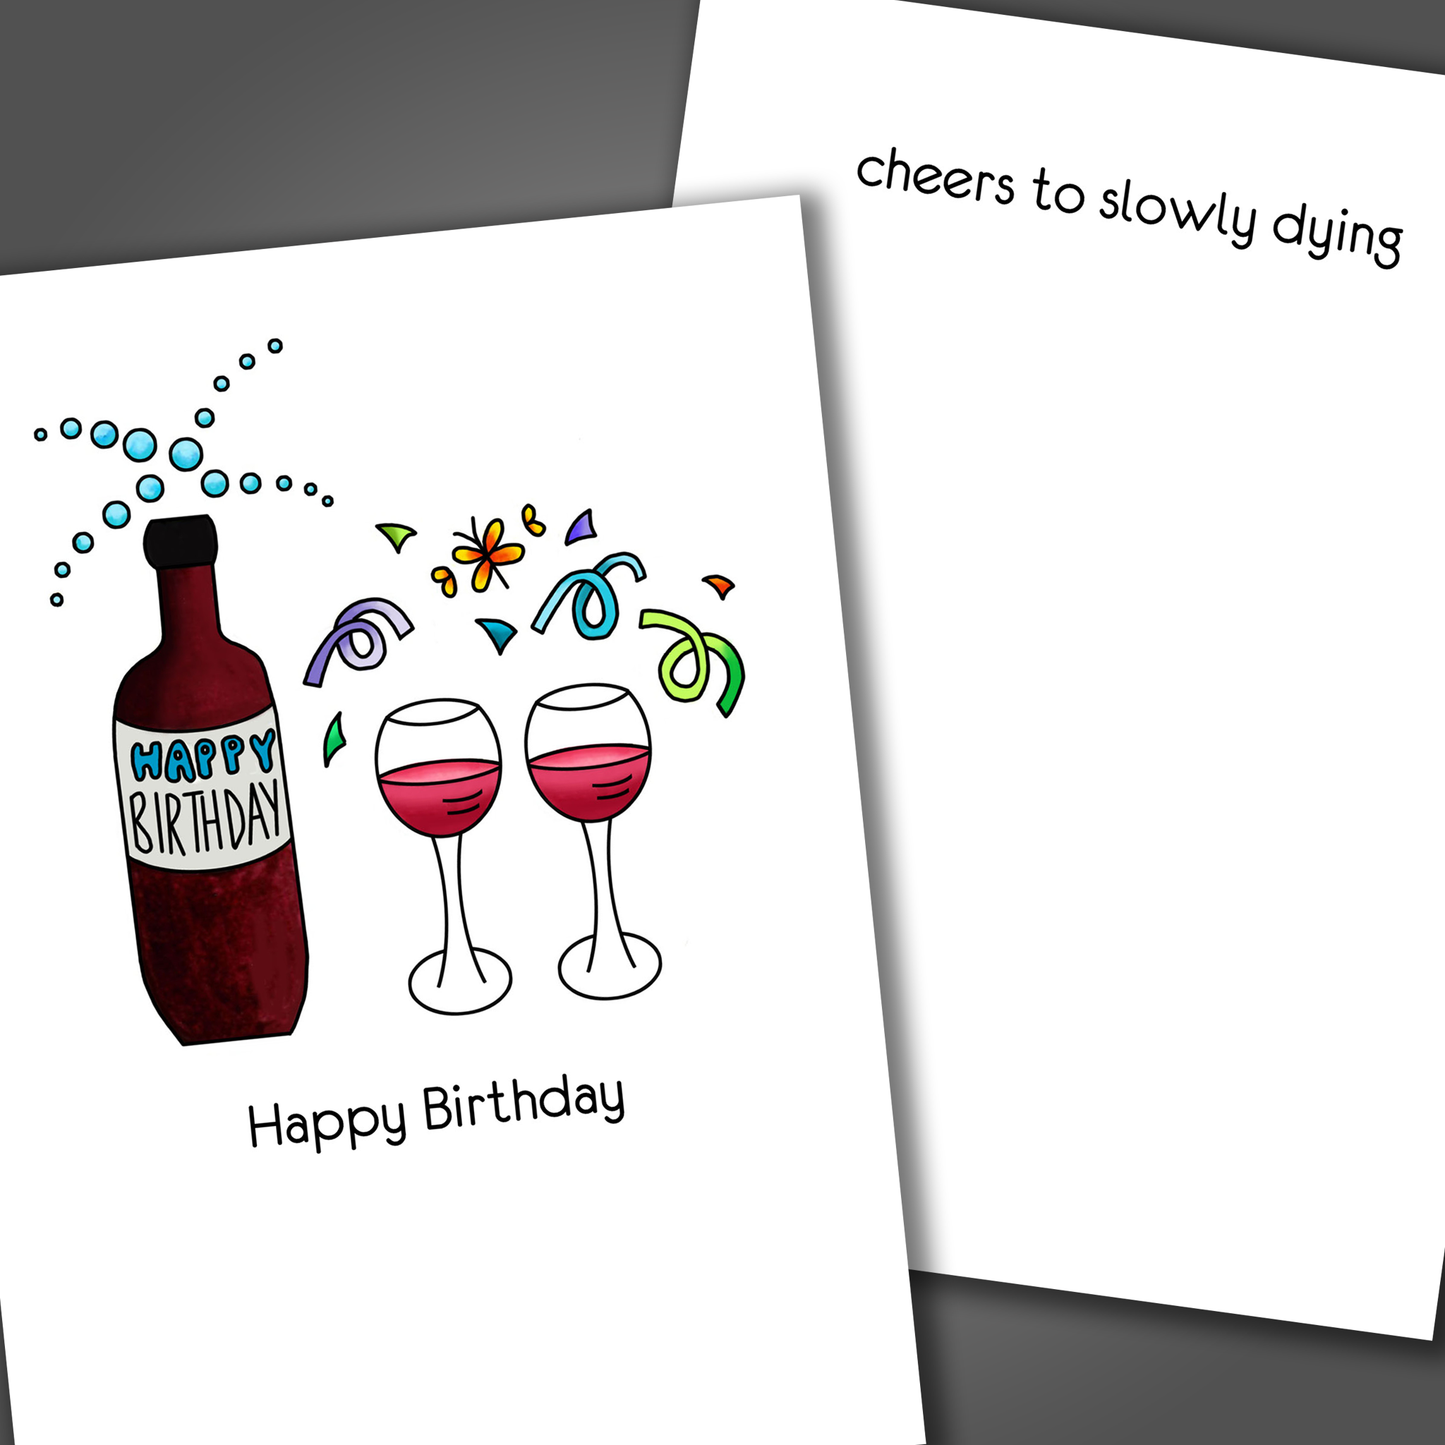 Funny happy birthday card with bottle of wine and two wine glasses on front of card. Inside the card is a funny joke that says cheers to slowly dying!